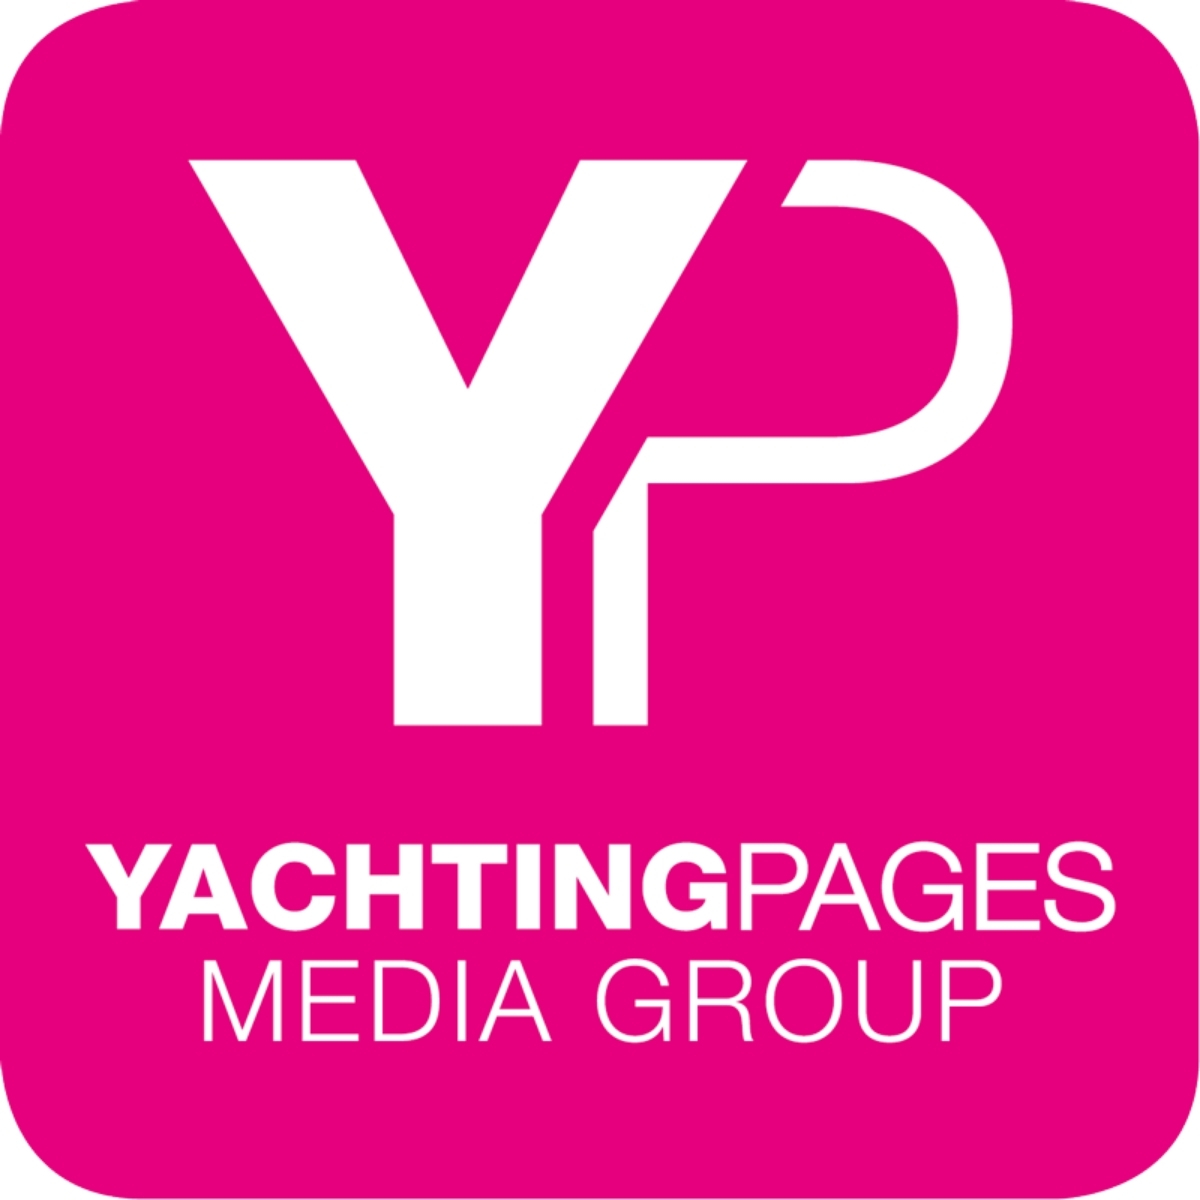 Yachting Pages company logo